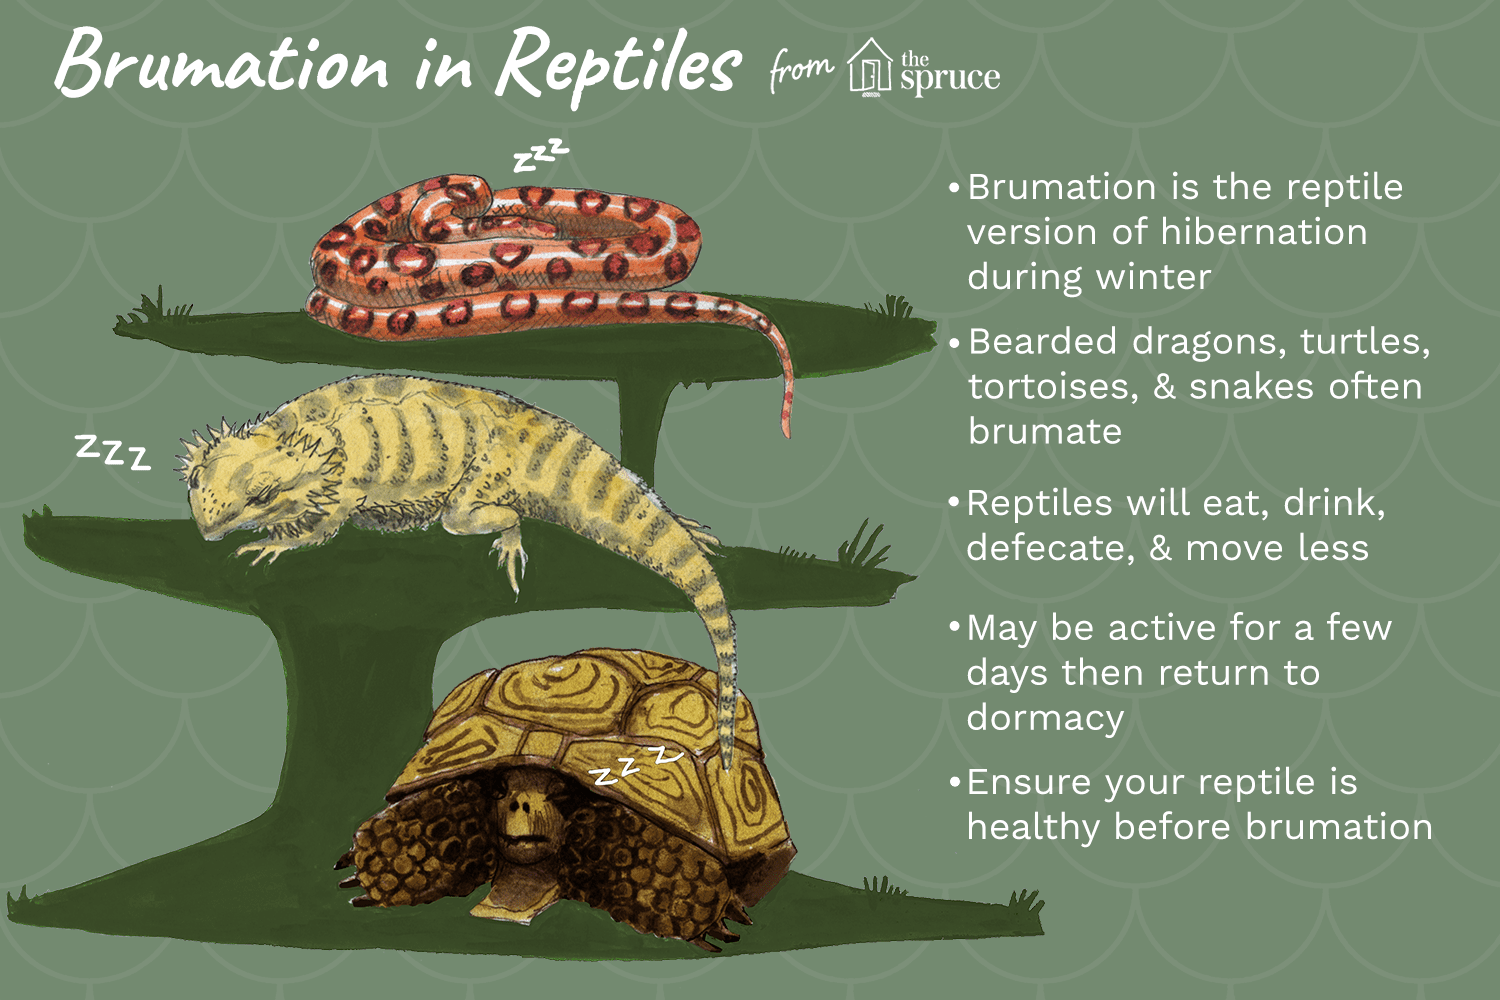 Illustration of brumation in reptiles